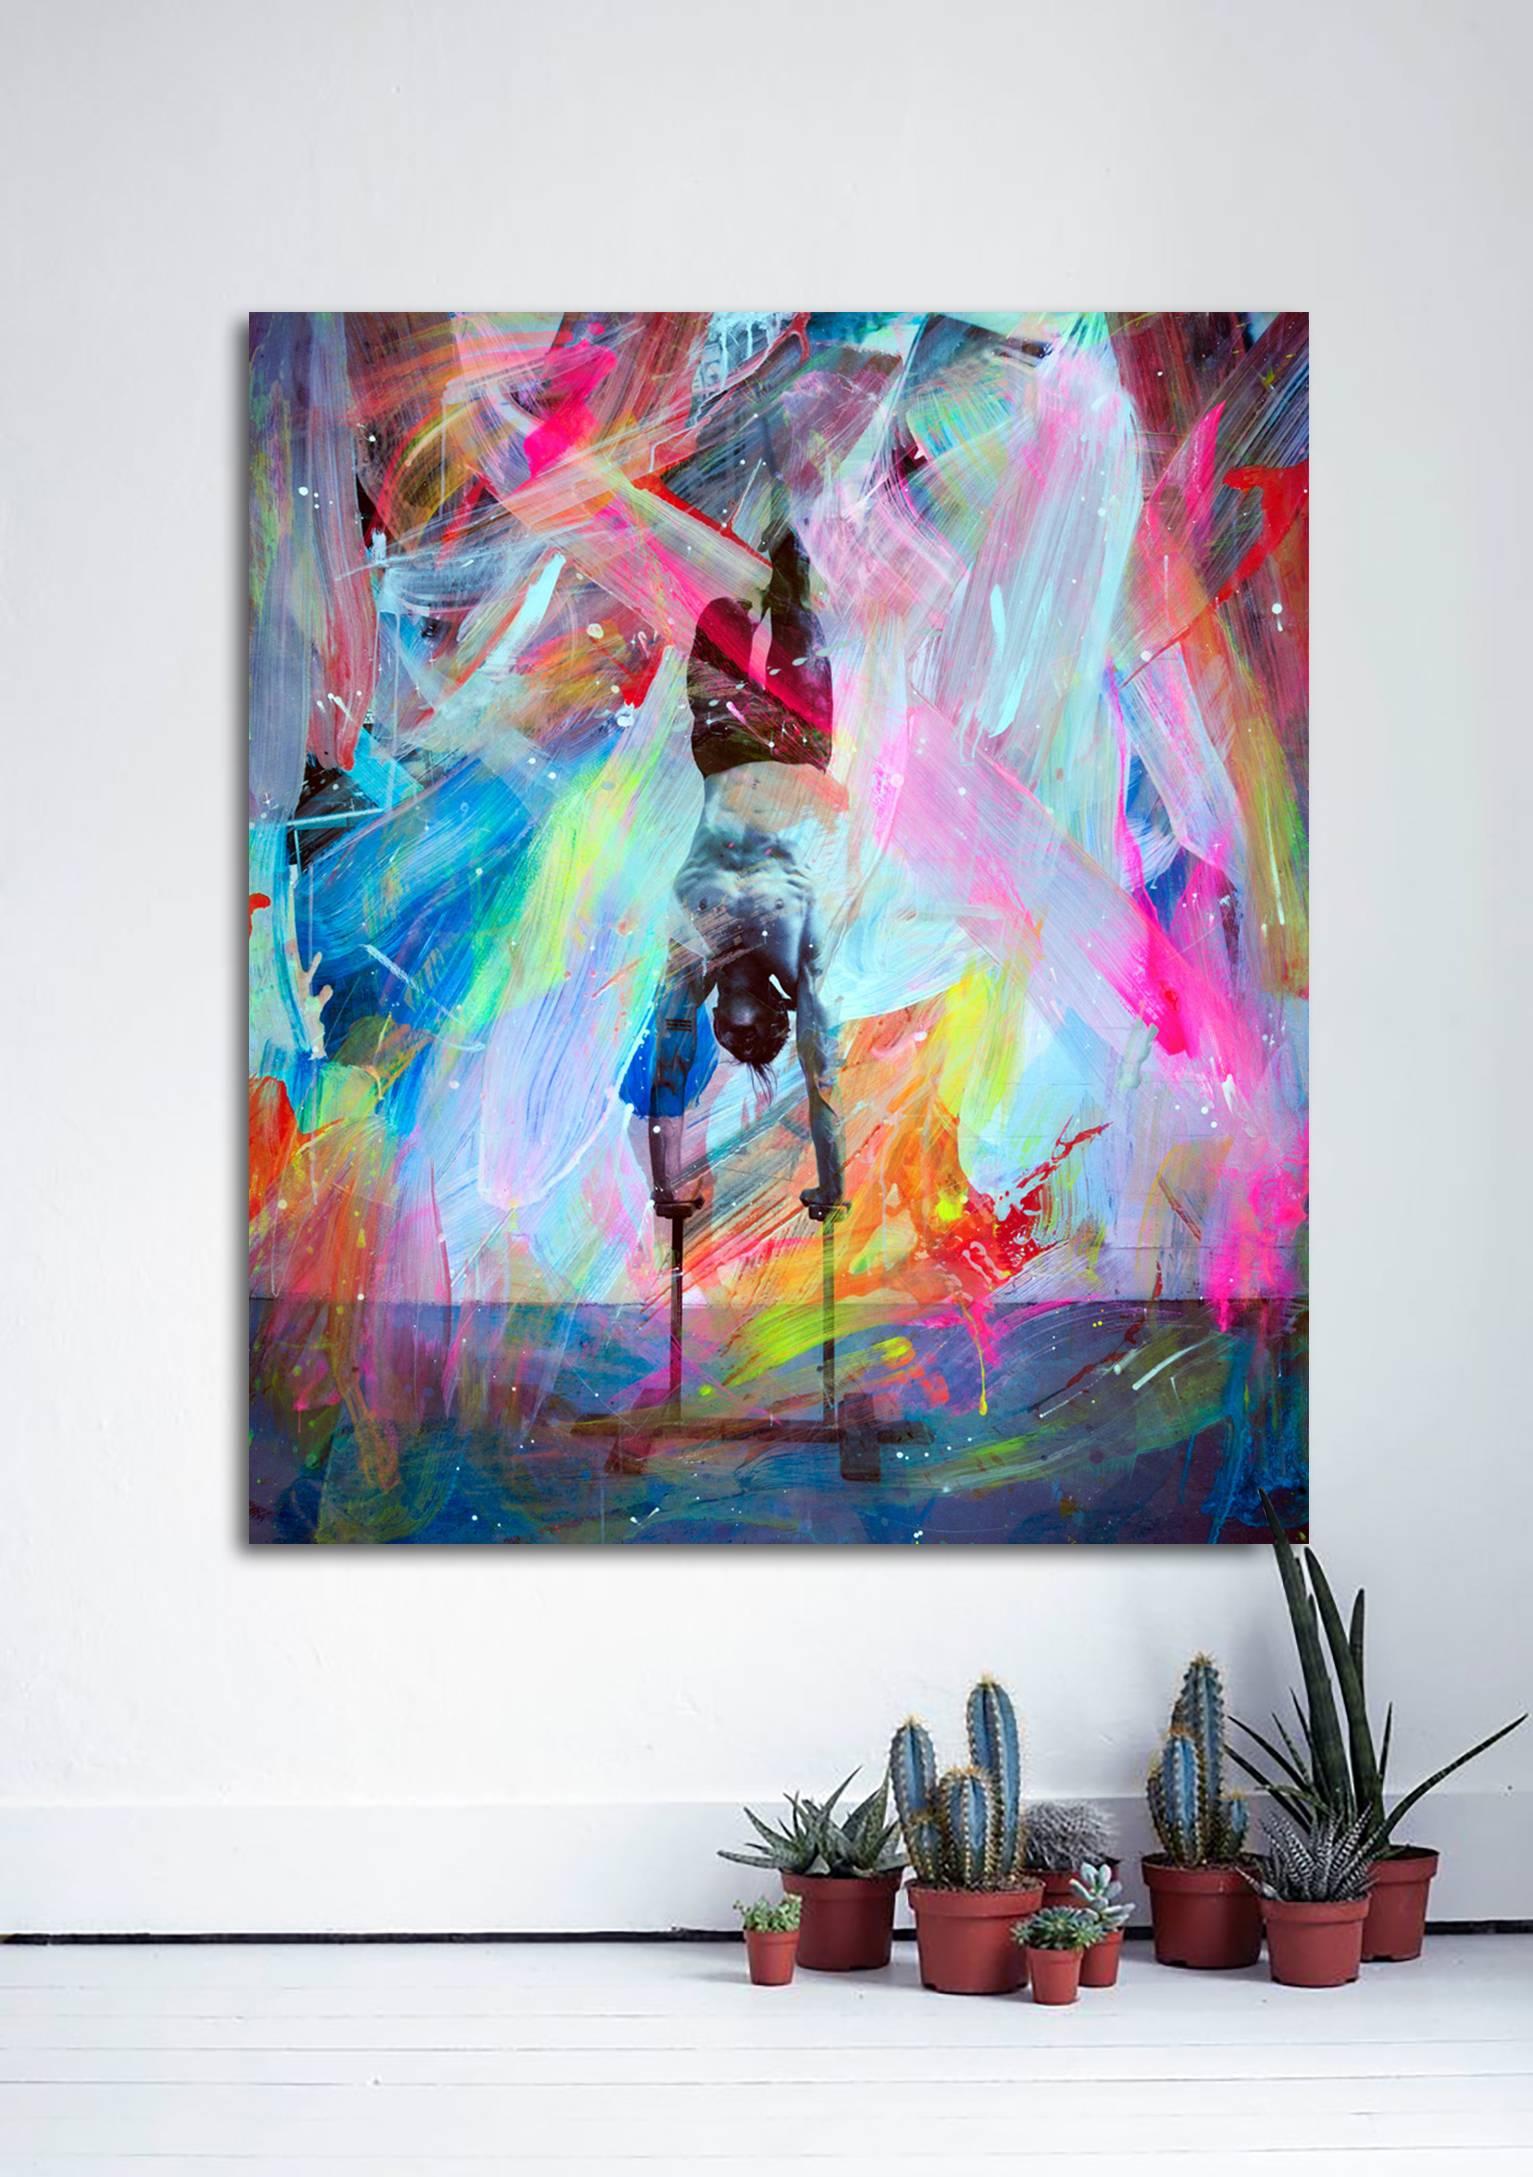 Romance Peregrino, colorful abstract handpainted photography with male acrobat - Painting by Alberto Sanchez